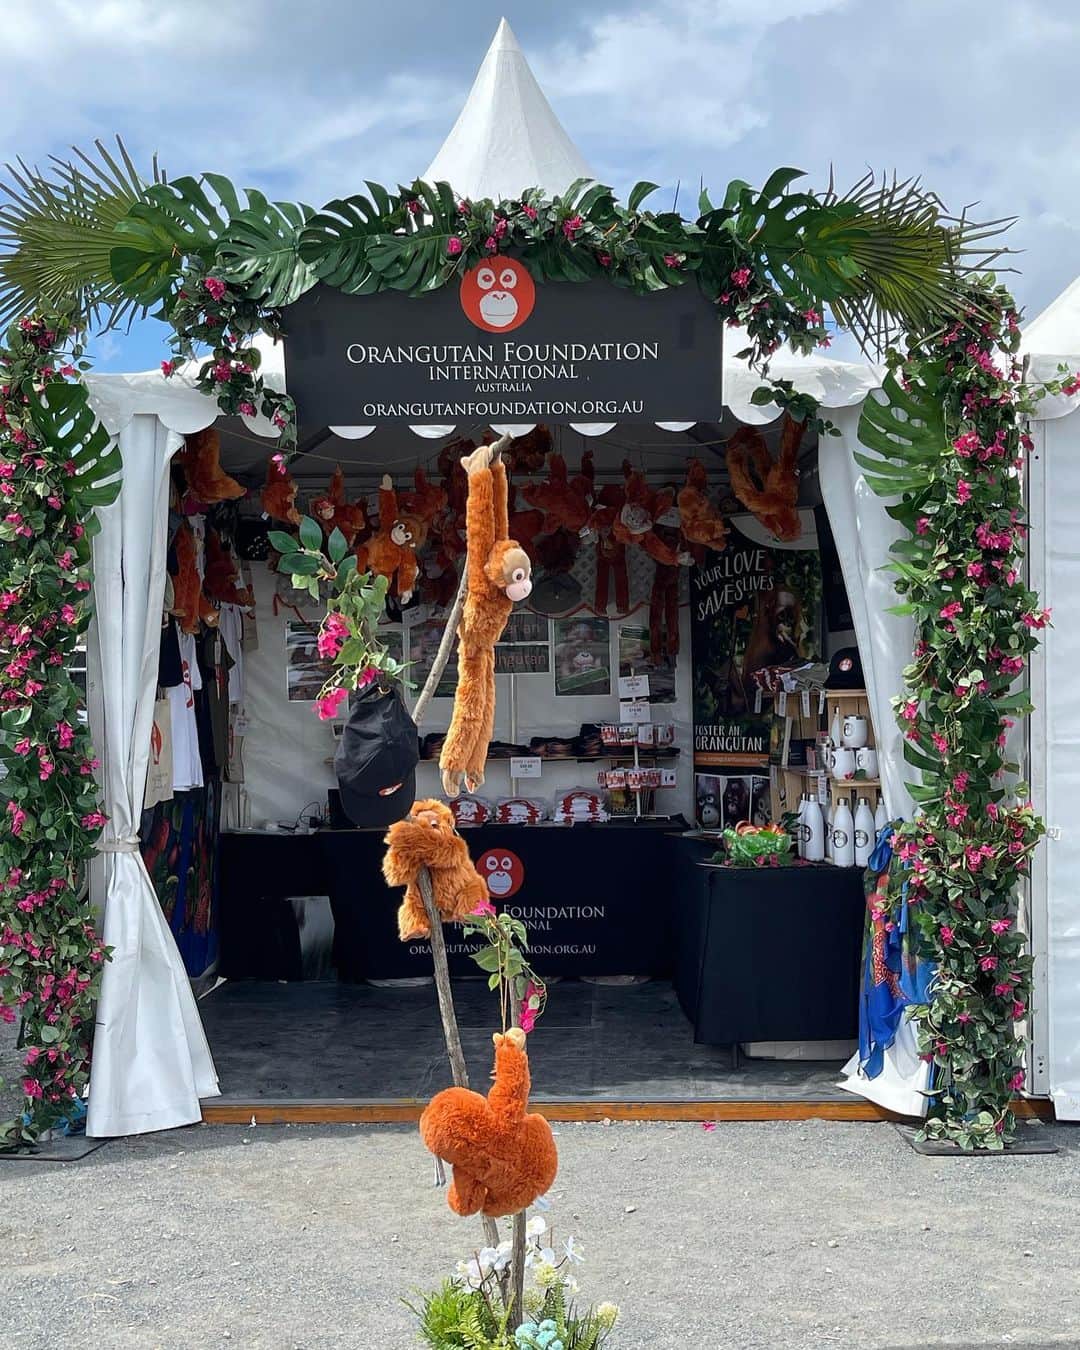 OFI Australiaのインスタグラム：「We’re so excited! We’re all set up and ready to go. If you’re coming to Bluesfest in Byron Bay this Easter please come visit our market stall and say hi. We’re right opposite the Delta stage. We’ve got tons of fabulous orangutan merchandise for sale - plush toys, t-shirts, headwear, bags, drinkware, jewellery and more. Or you can foster a gorgeous orphan orangutan. All proceeds help us in our fight to save orangutans.  #ofibluesfest2023 #bluesfestbyronbay #bluesfest2023 #orangutanmerchandise #saveorangutans #fosteranorangutan #orangutanfoundationinternational」